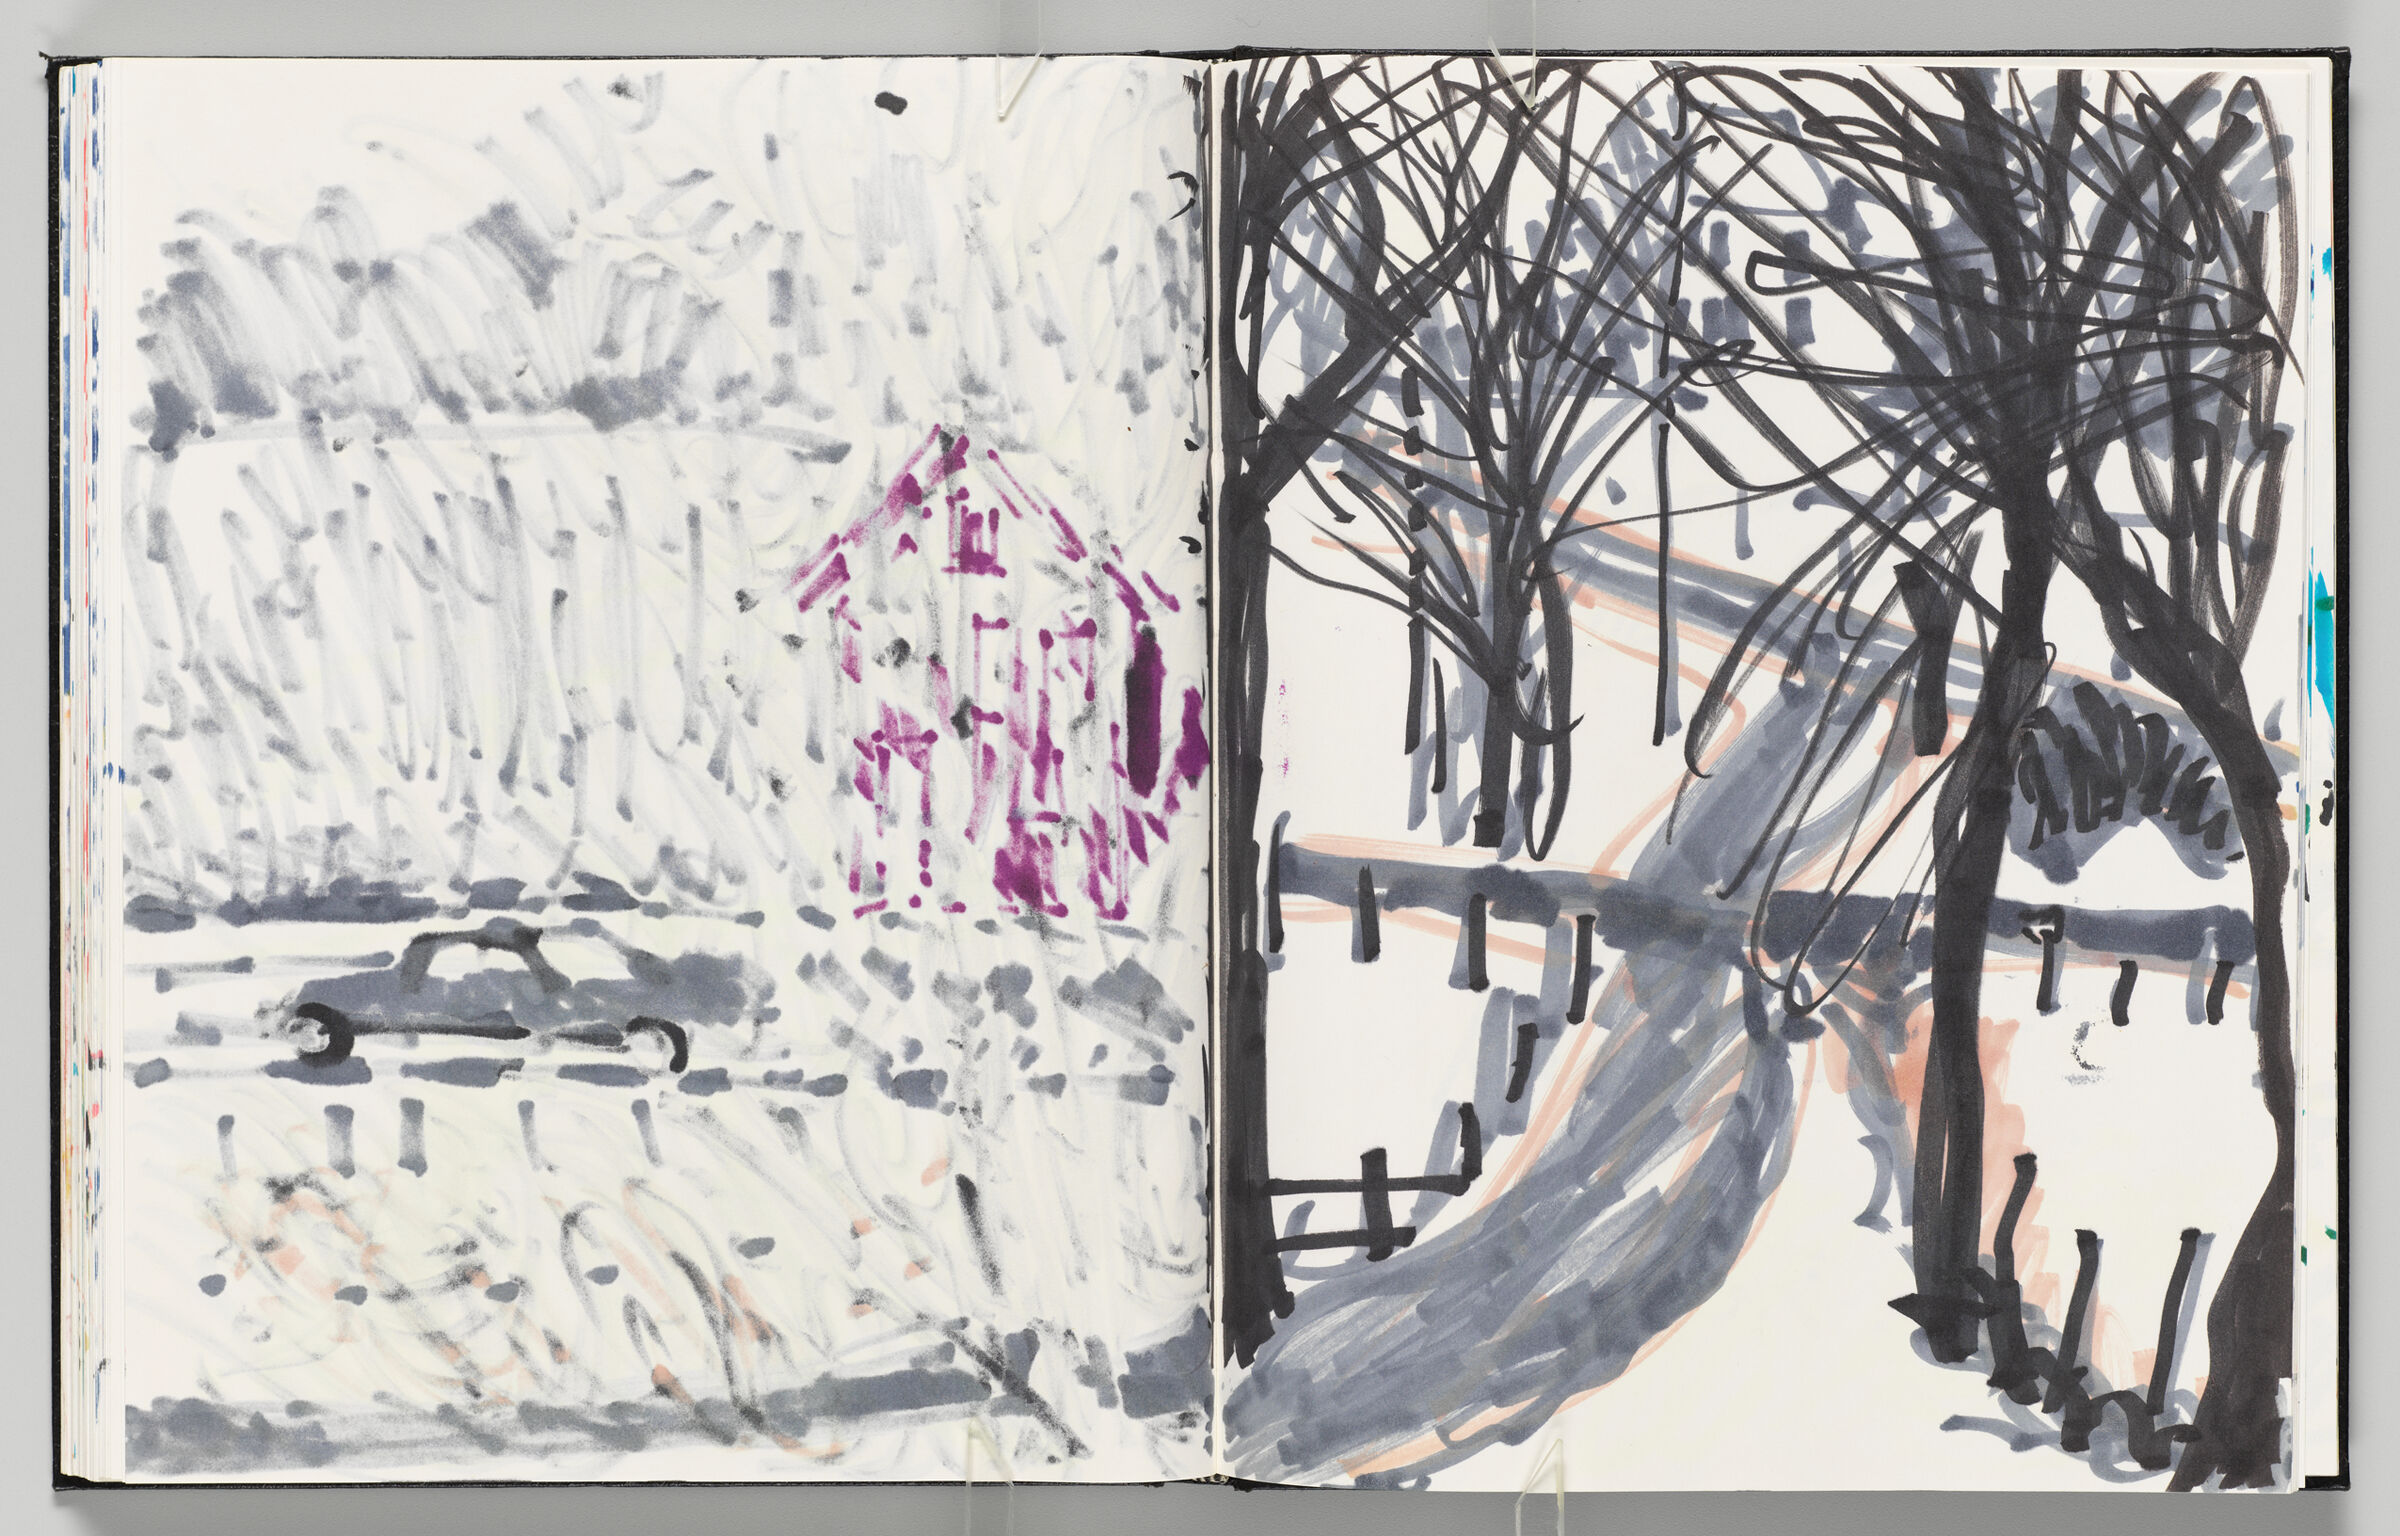 Untitled (Bleed-Through Of Previous Page, Left Page); Untitled (Groton Landscape, Right Page)